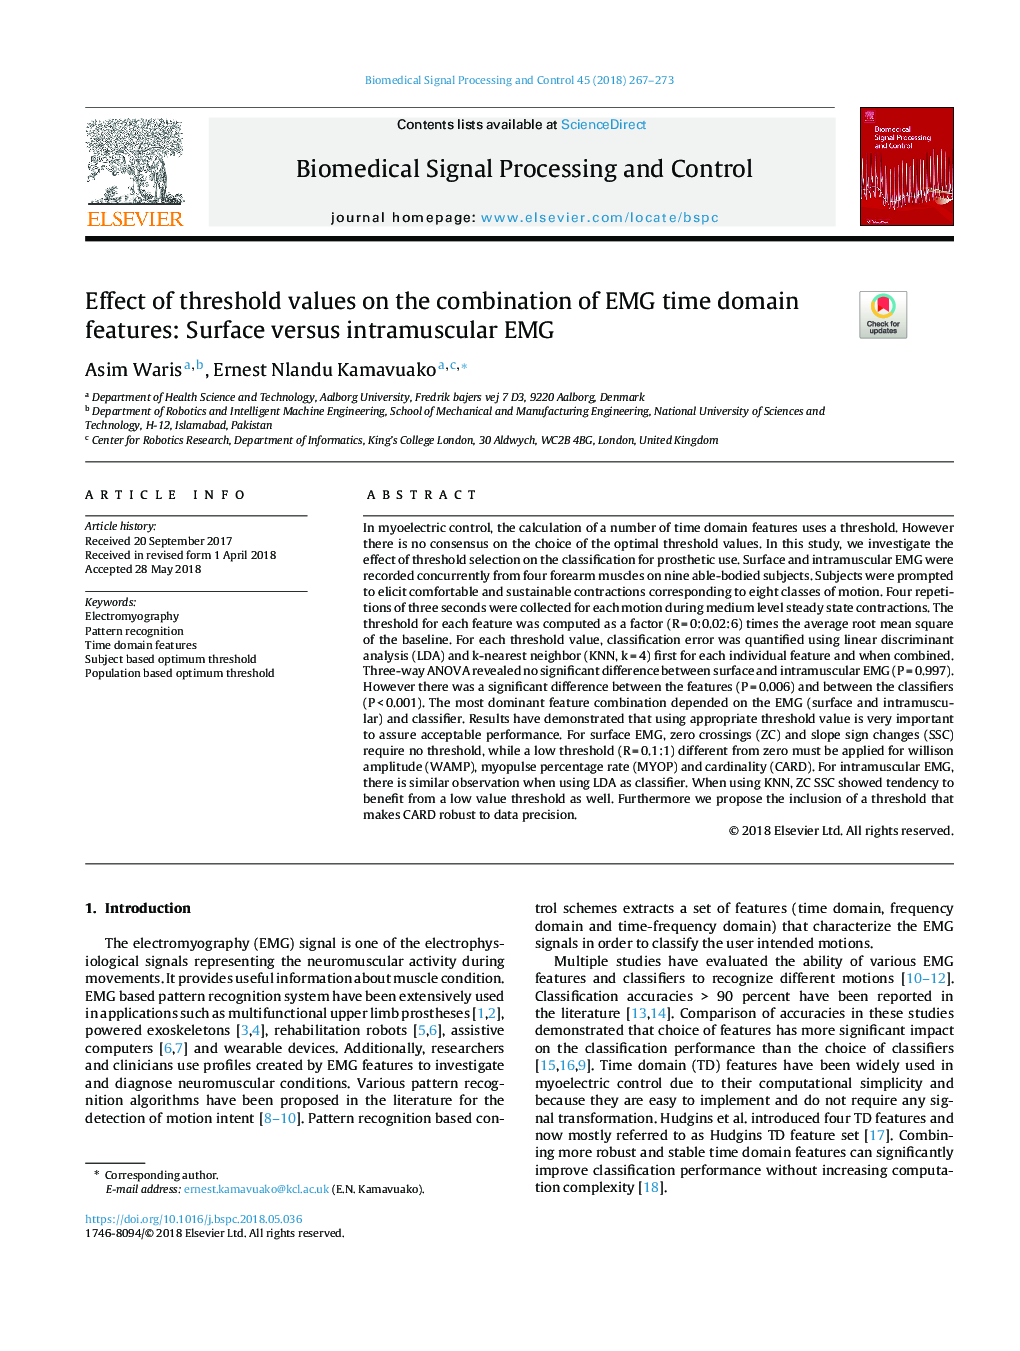 Effect of threshold values on the combination of EMG time domain features: Surface versus intramuscular EMG